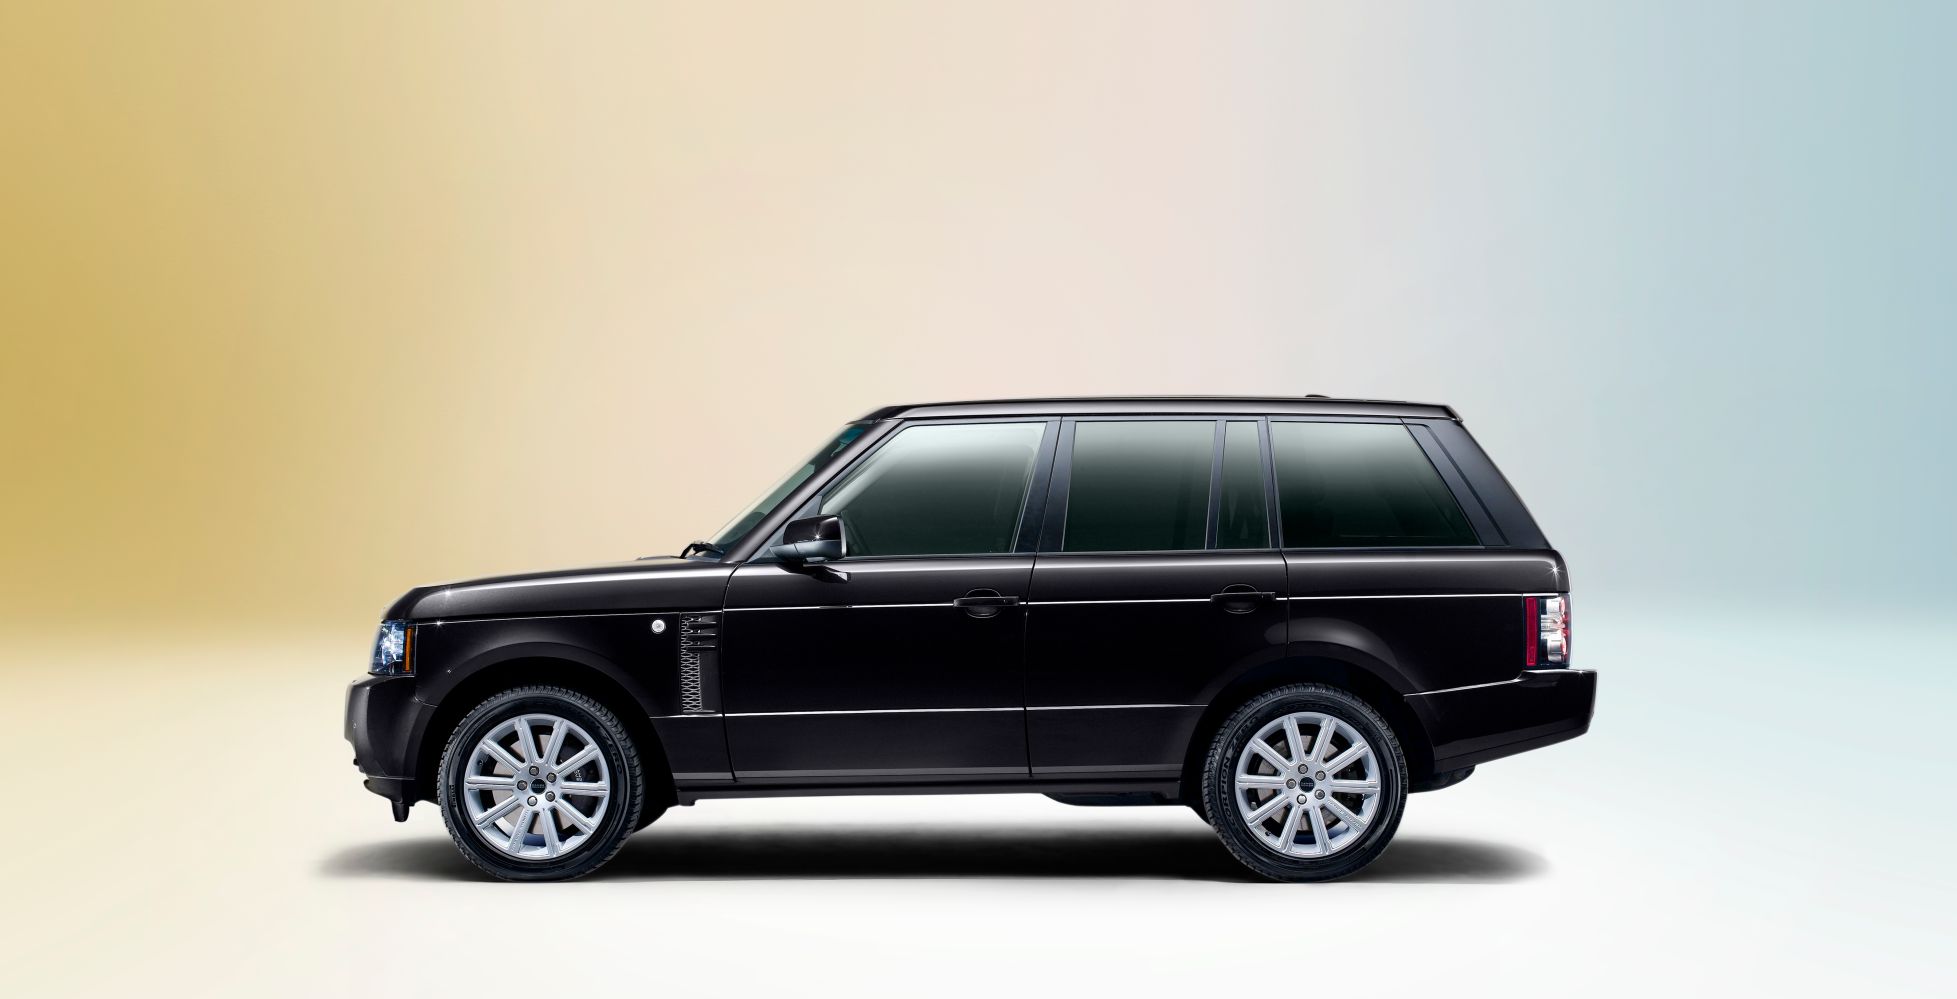 <p>The third Range Rover generation, known as L322, cemented the model’s image as a high-luxury vehicle. Designed under BMW, the L322 shared drivetrain and electronic components with the E38-generation BMW 7-series and the E39-generation BMW 5-series. This was the first Range Rover to exclusively offer an automatic transmission, and one of the first SUVs in the world to offer fully independent suspension front and rear. Three-zone climate control, panoramic sunroofs, rear-seat DVD players, touchscreen nav systems, and backup cameras all proved that the Range Rover was now firmly in the luxury segment. In later years, supercharged V8s making up to 503 hp were available.</p>